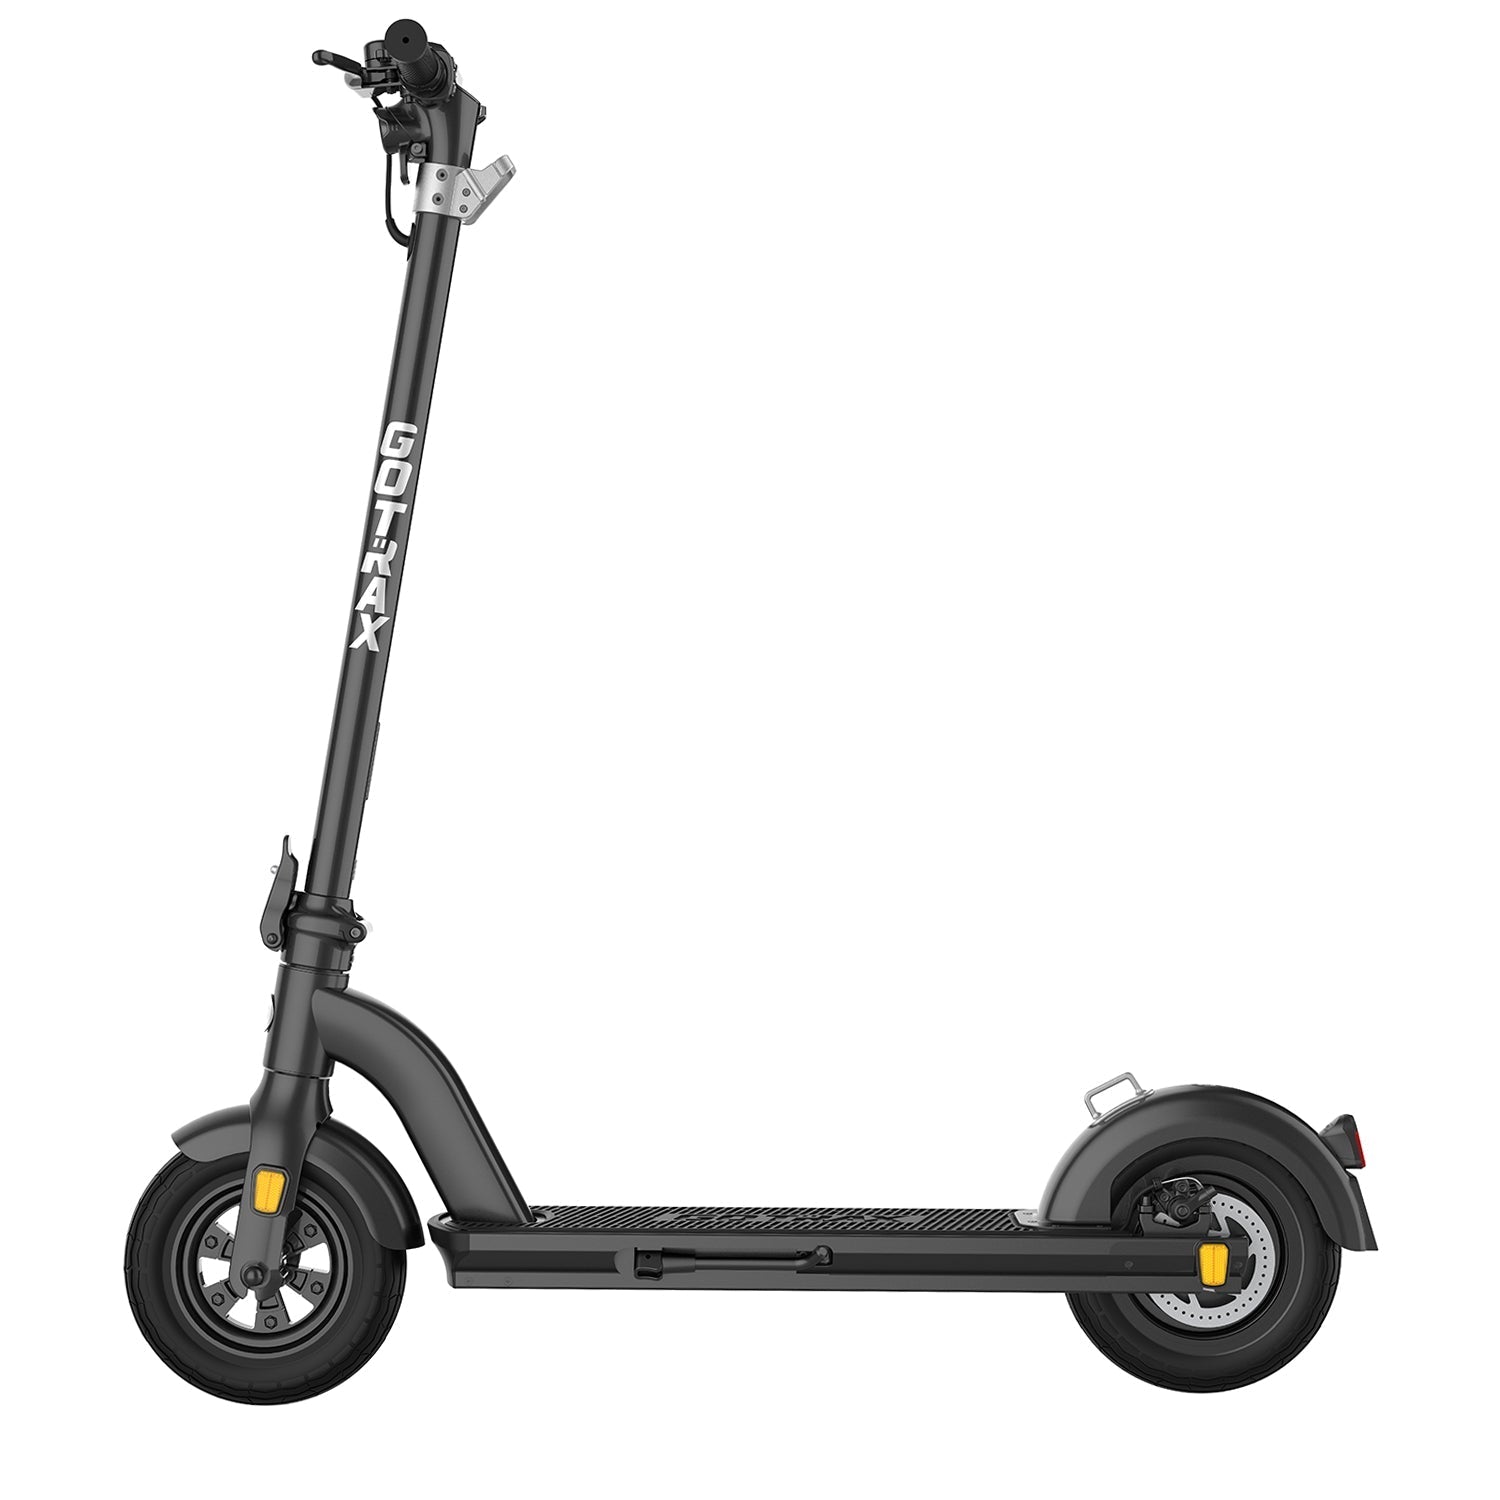 Refurbished Tour XP Electric Scooter - GOTRAX